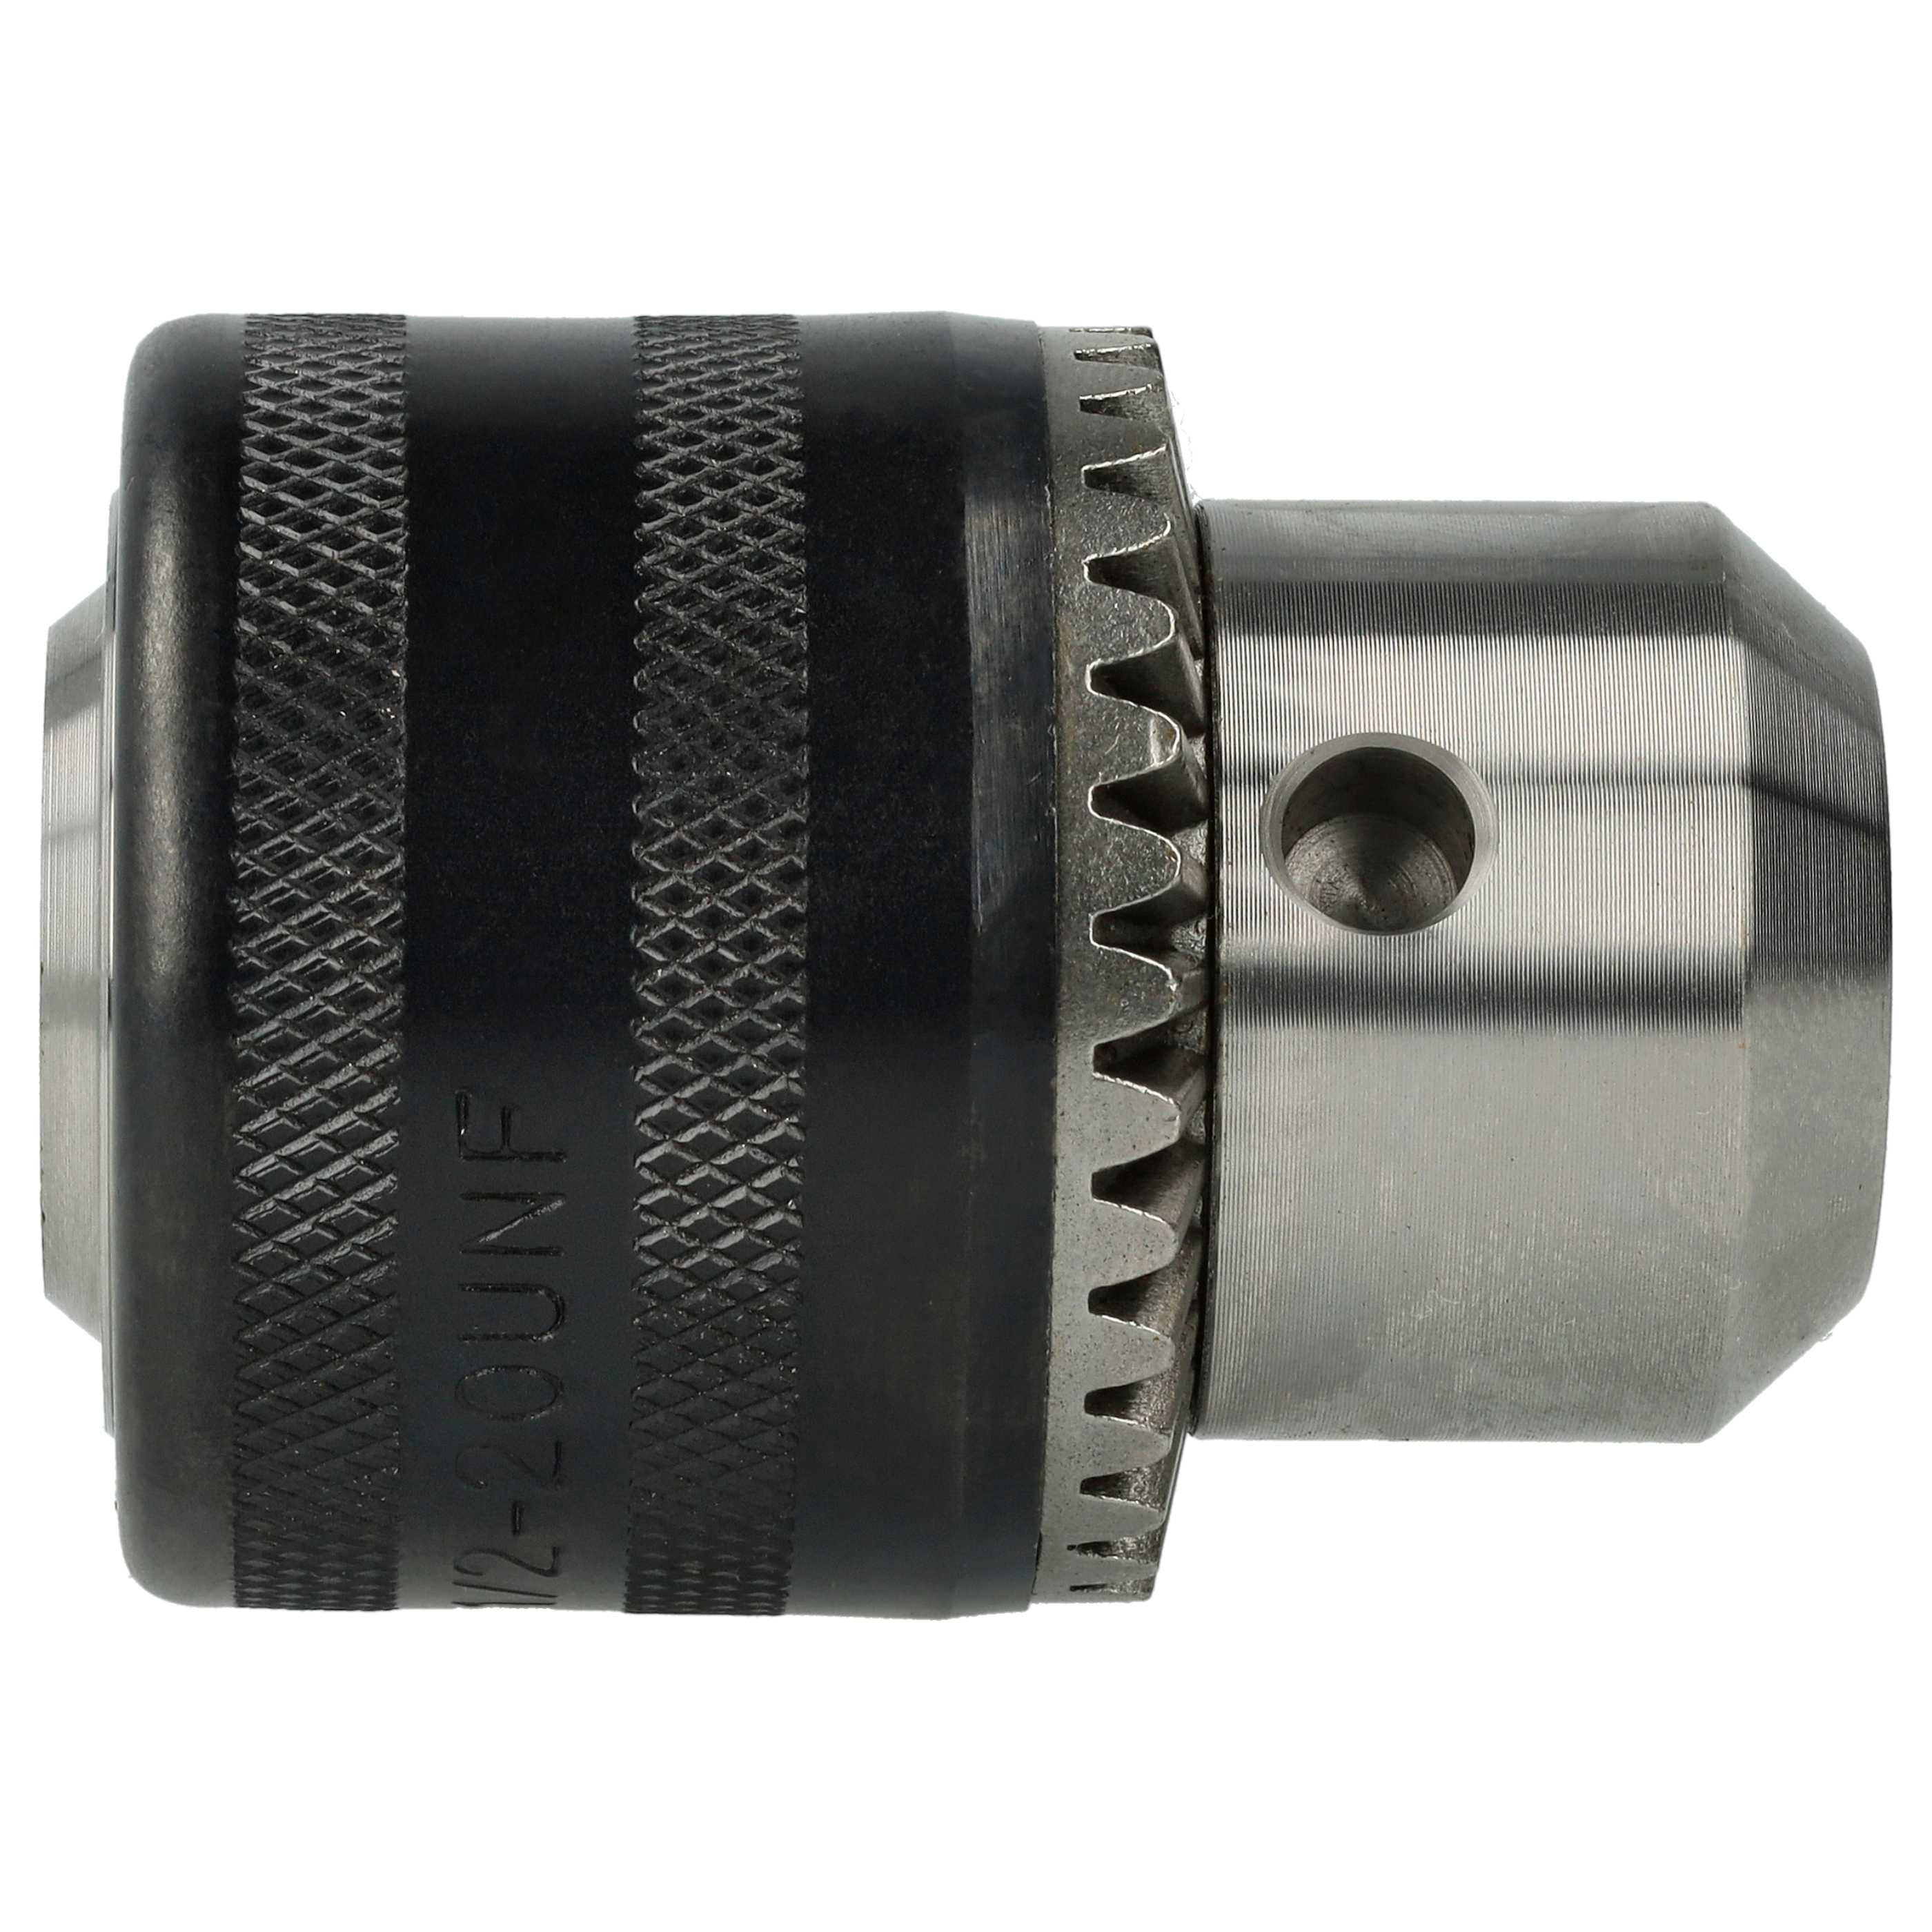 Clamping Chuck Jaw Adapter suitable for Universal AEG Electric Screwdriver Drill, Hammer Drill - 1.5 